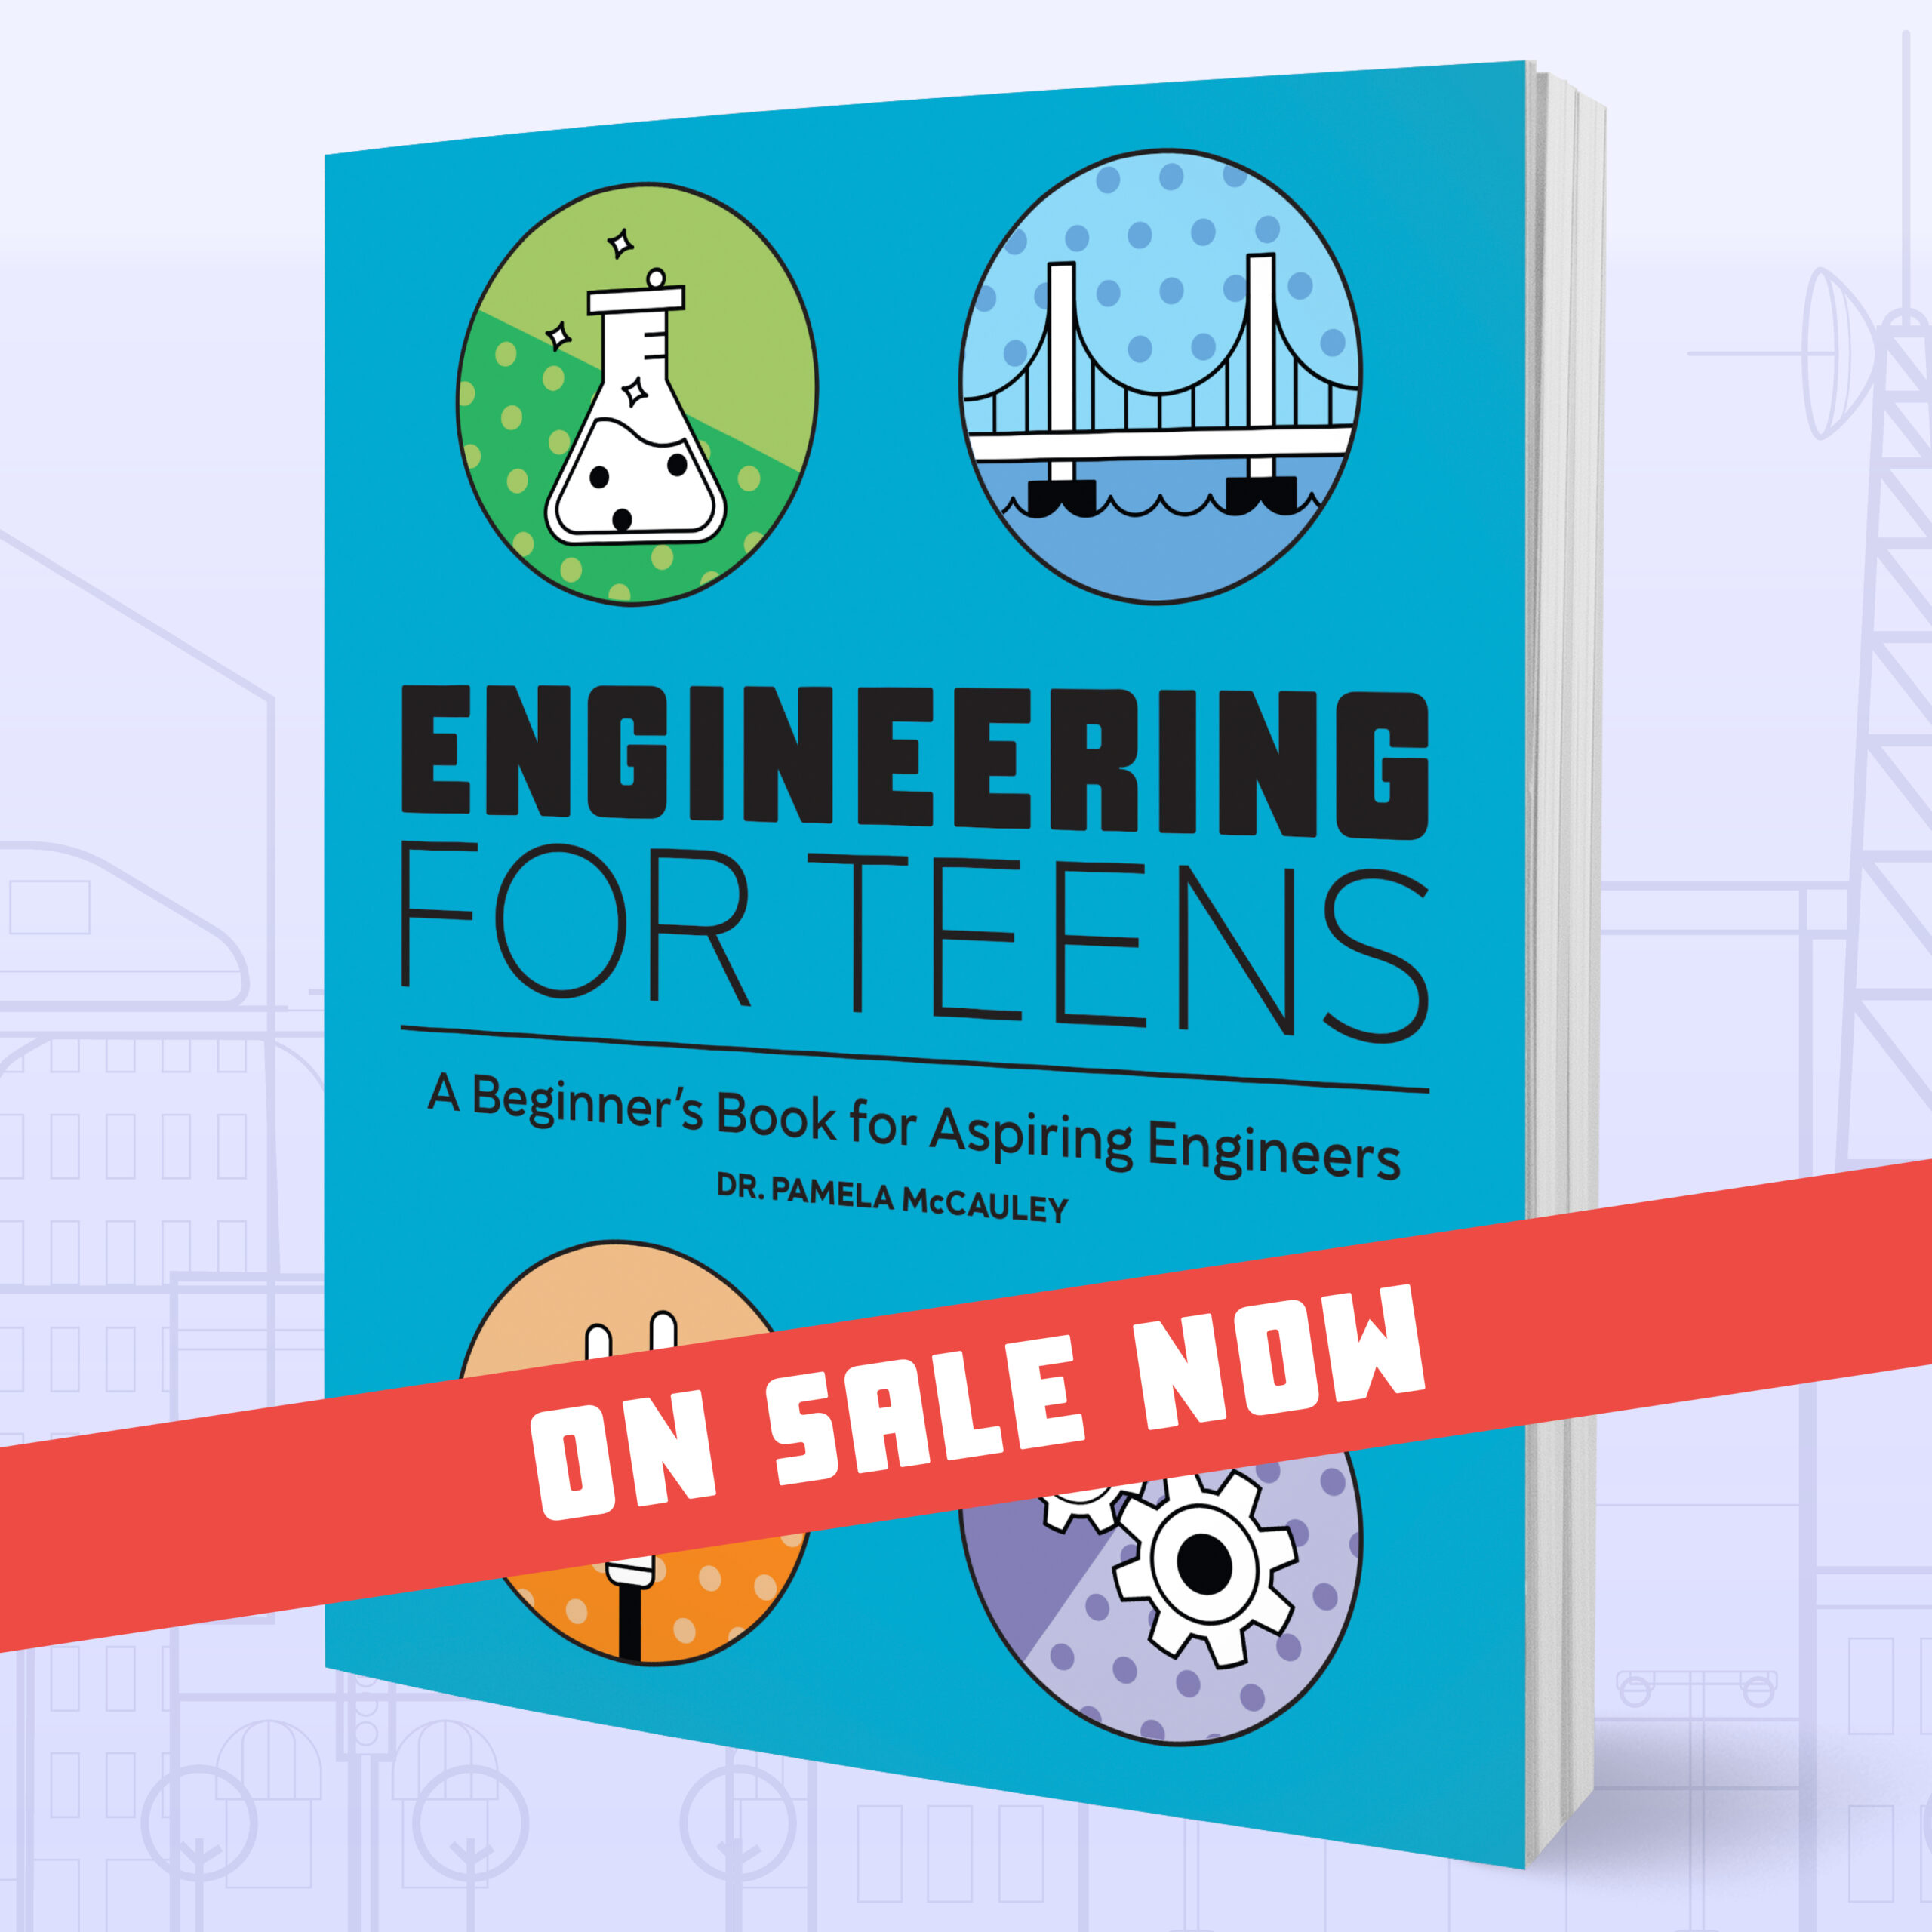 engineering for teens blue book with red ribbon that says on sale now